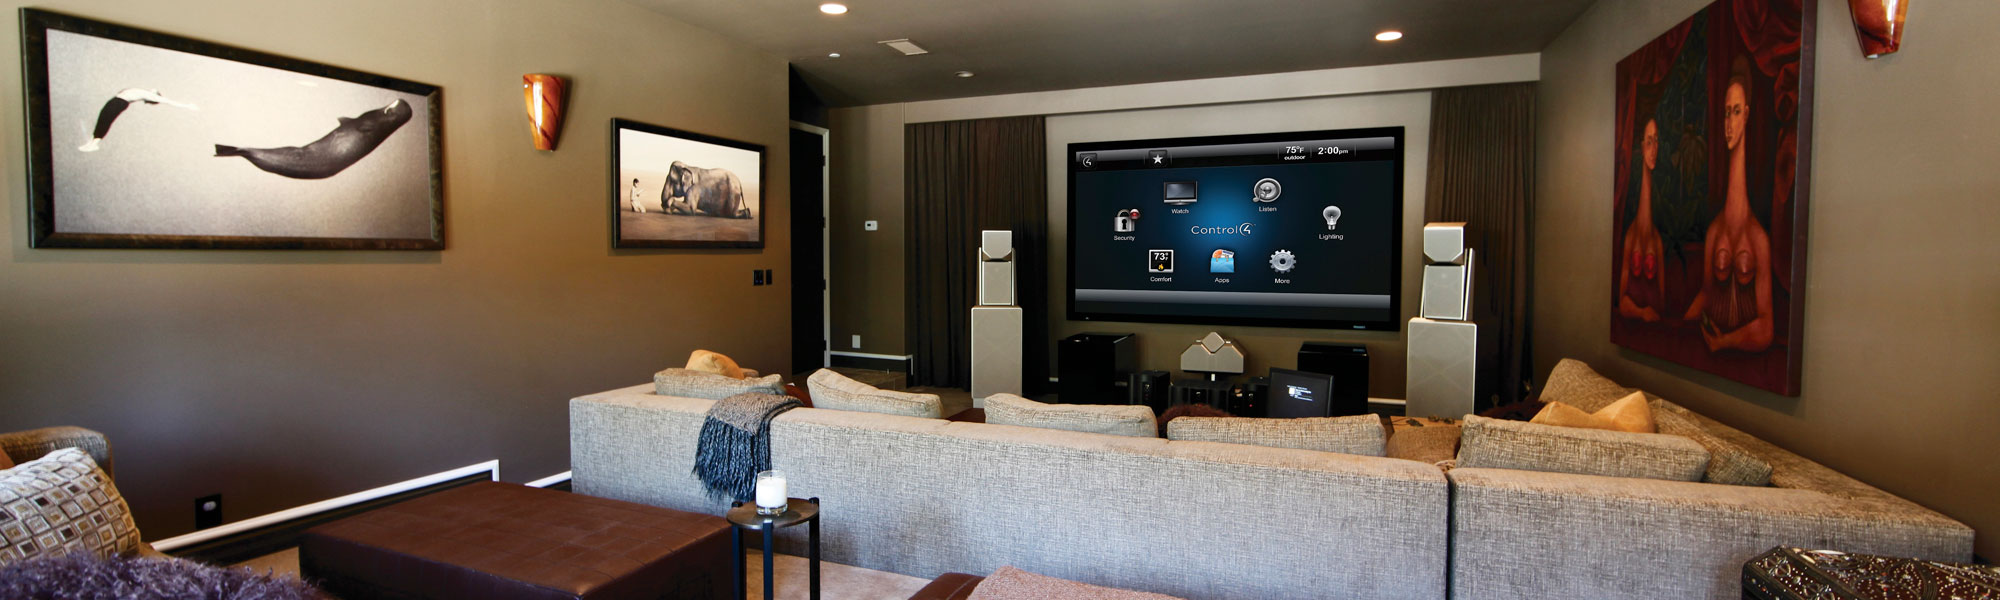 Big Wall Mounted TV with Surround Sound